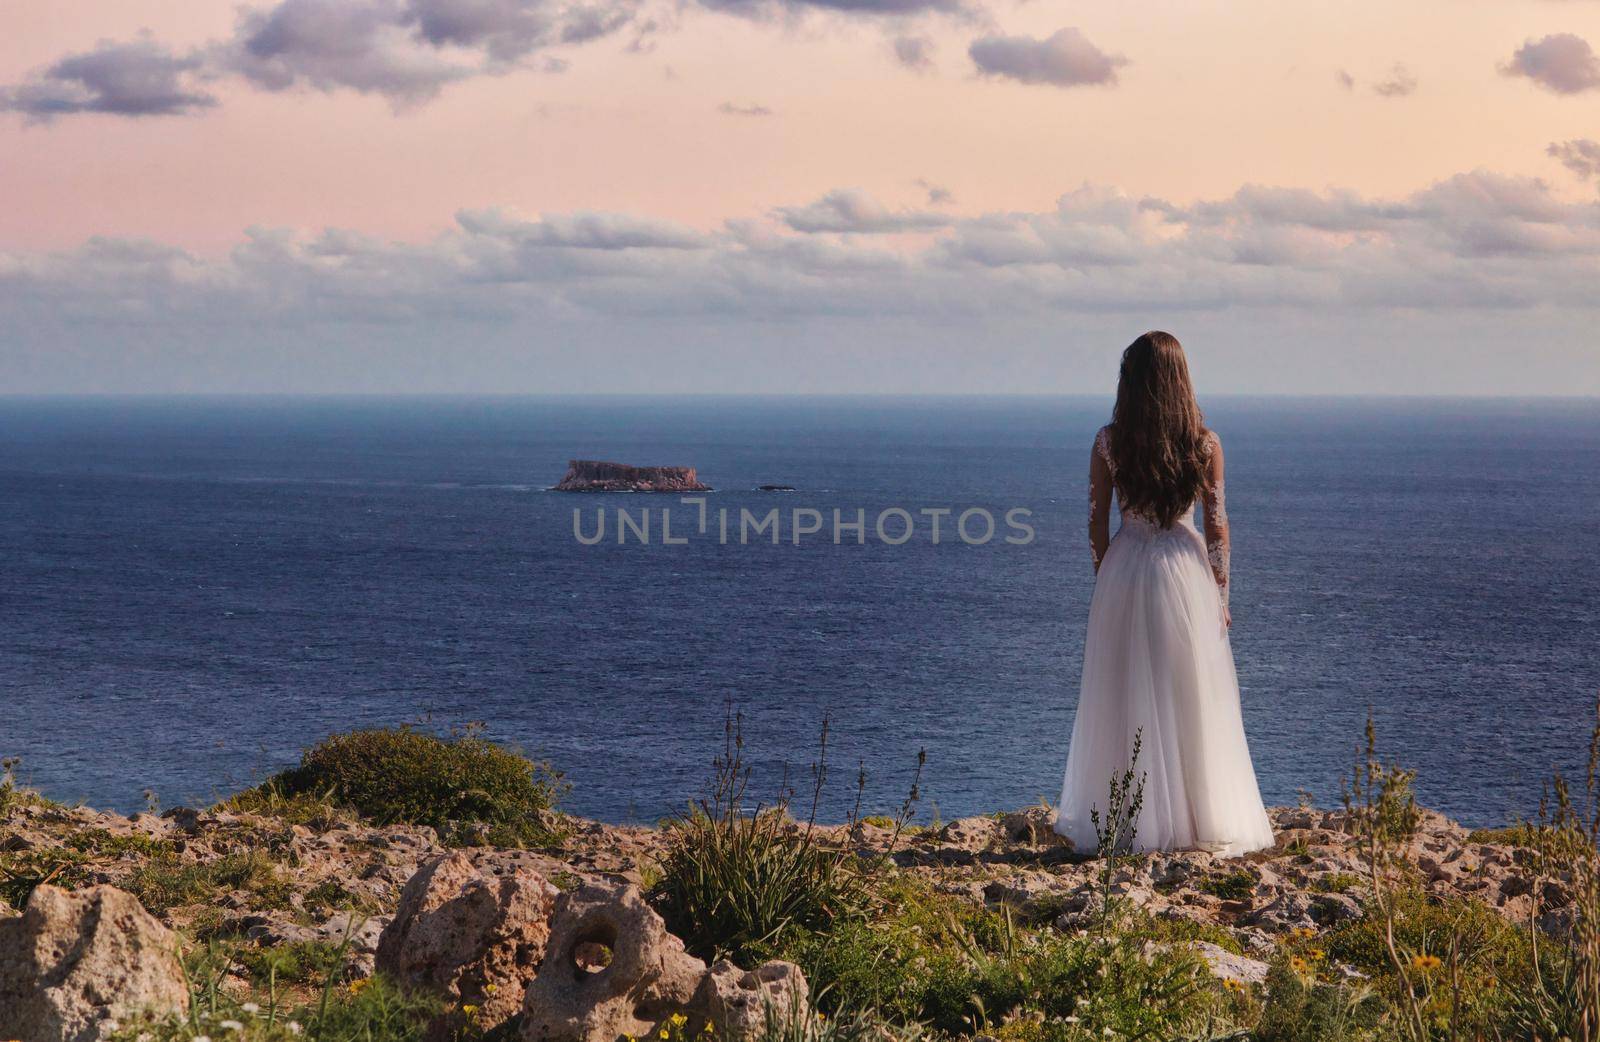 A bride in a white wedding dress standing on a cliff edge looking out to sea